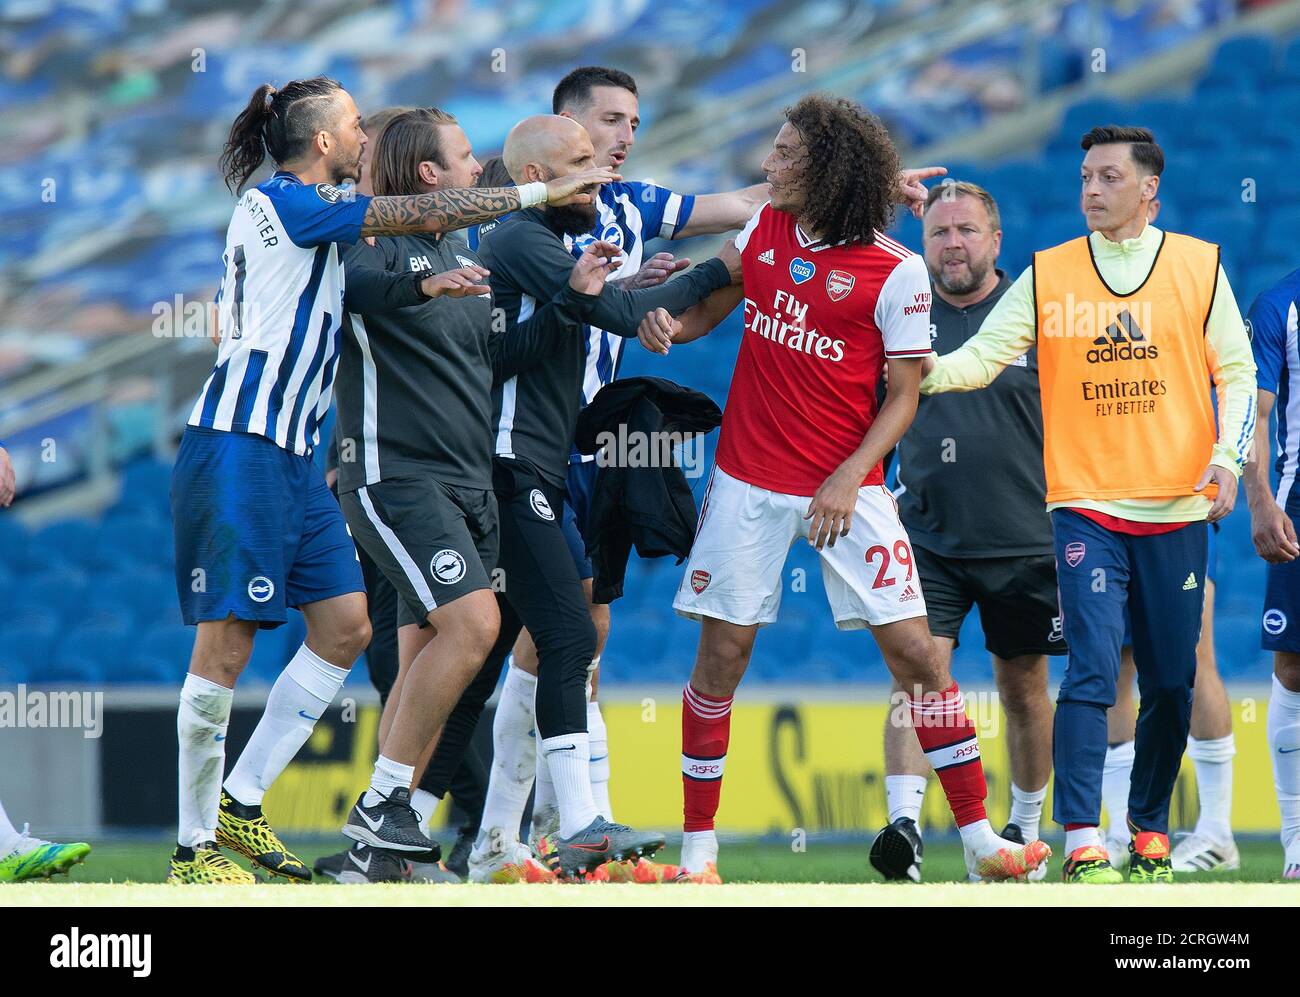 Matteo Guendouzi clashes with Brighton players at the final whistle during the Premier League match at the AMEX Stadium, Brighton.   PHOTO CREDIT : © Stock Photo